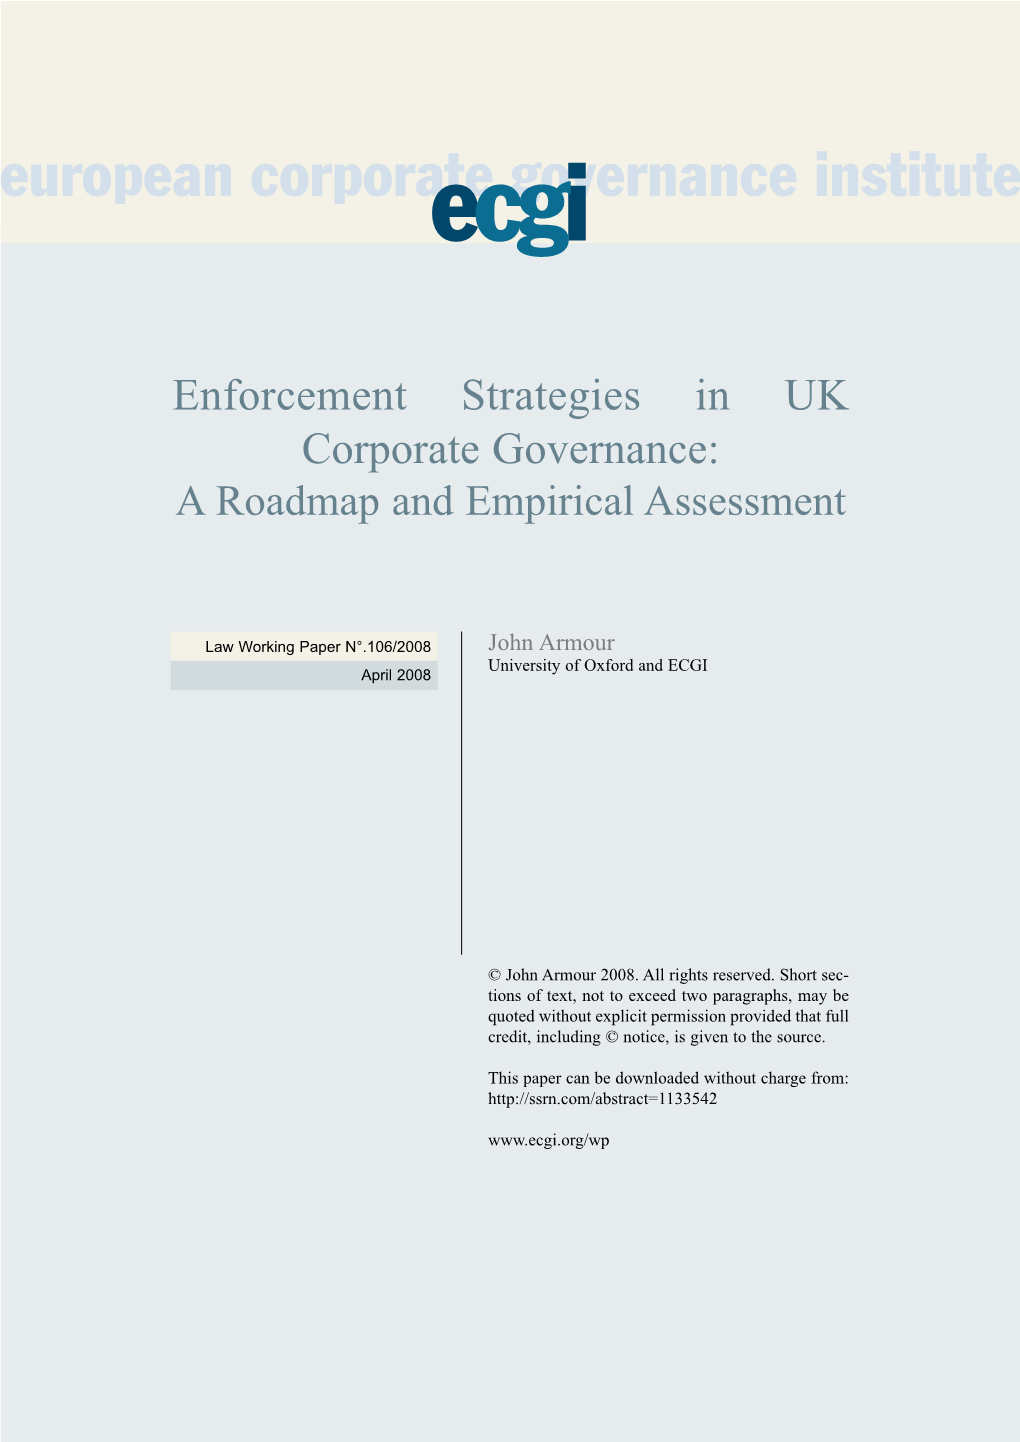 Enforcement Strategies in UK Corporate Governance: a Roadmap and Empirical Assessment